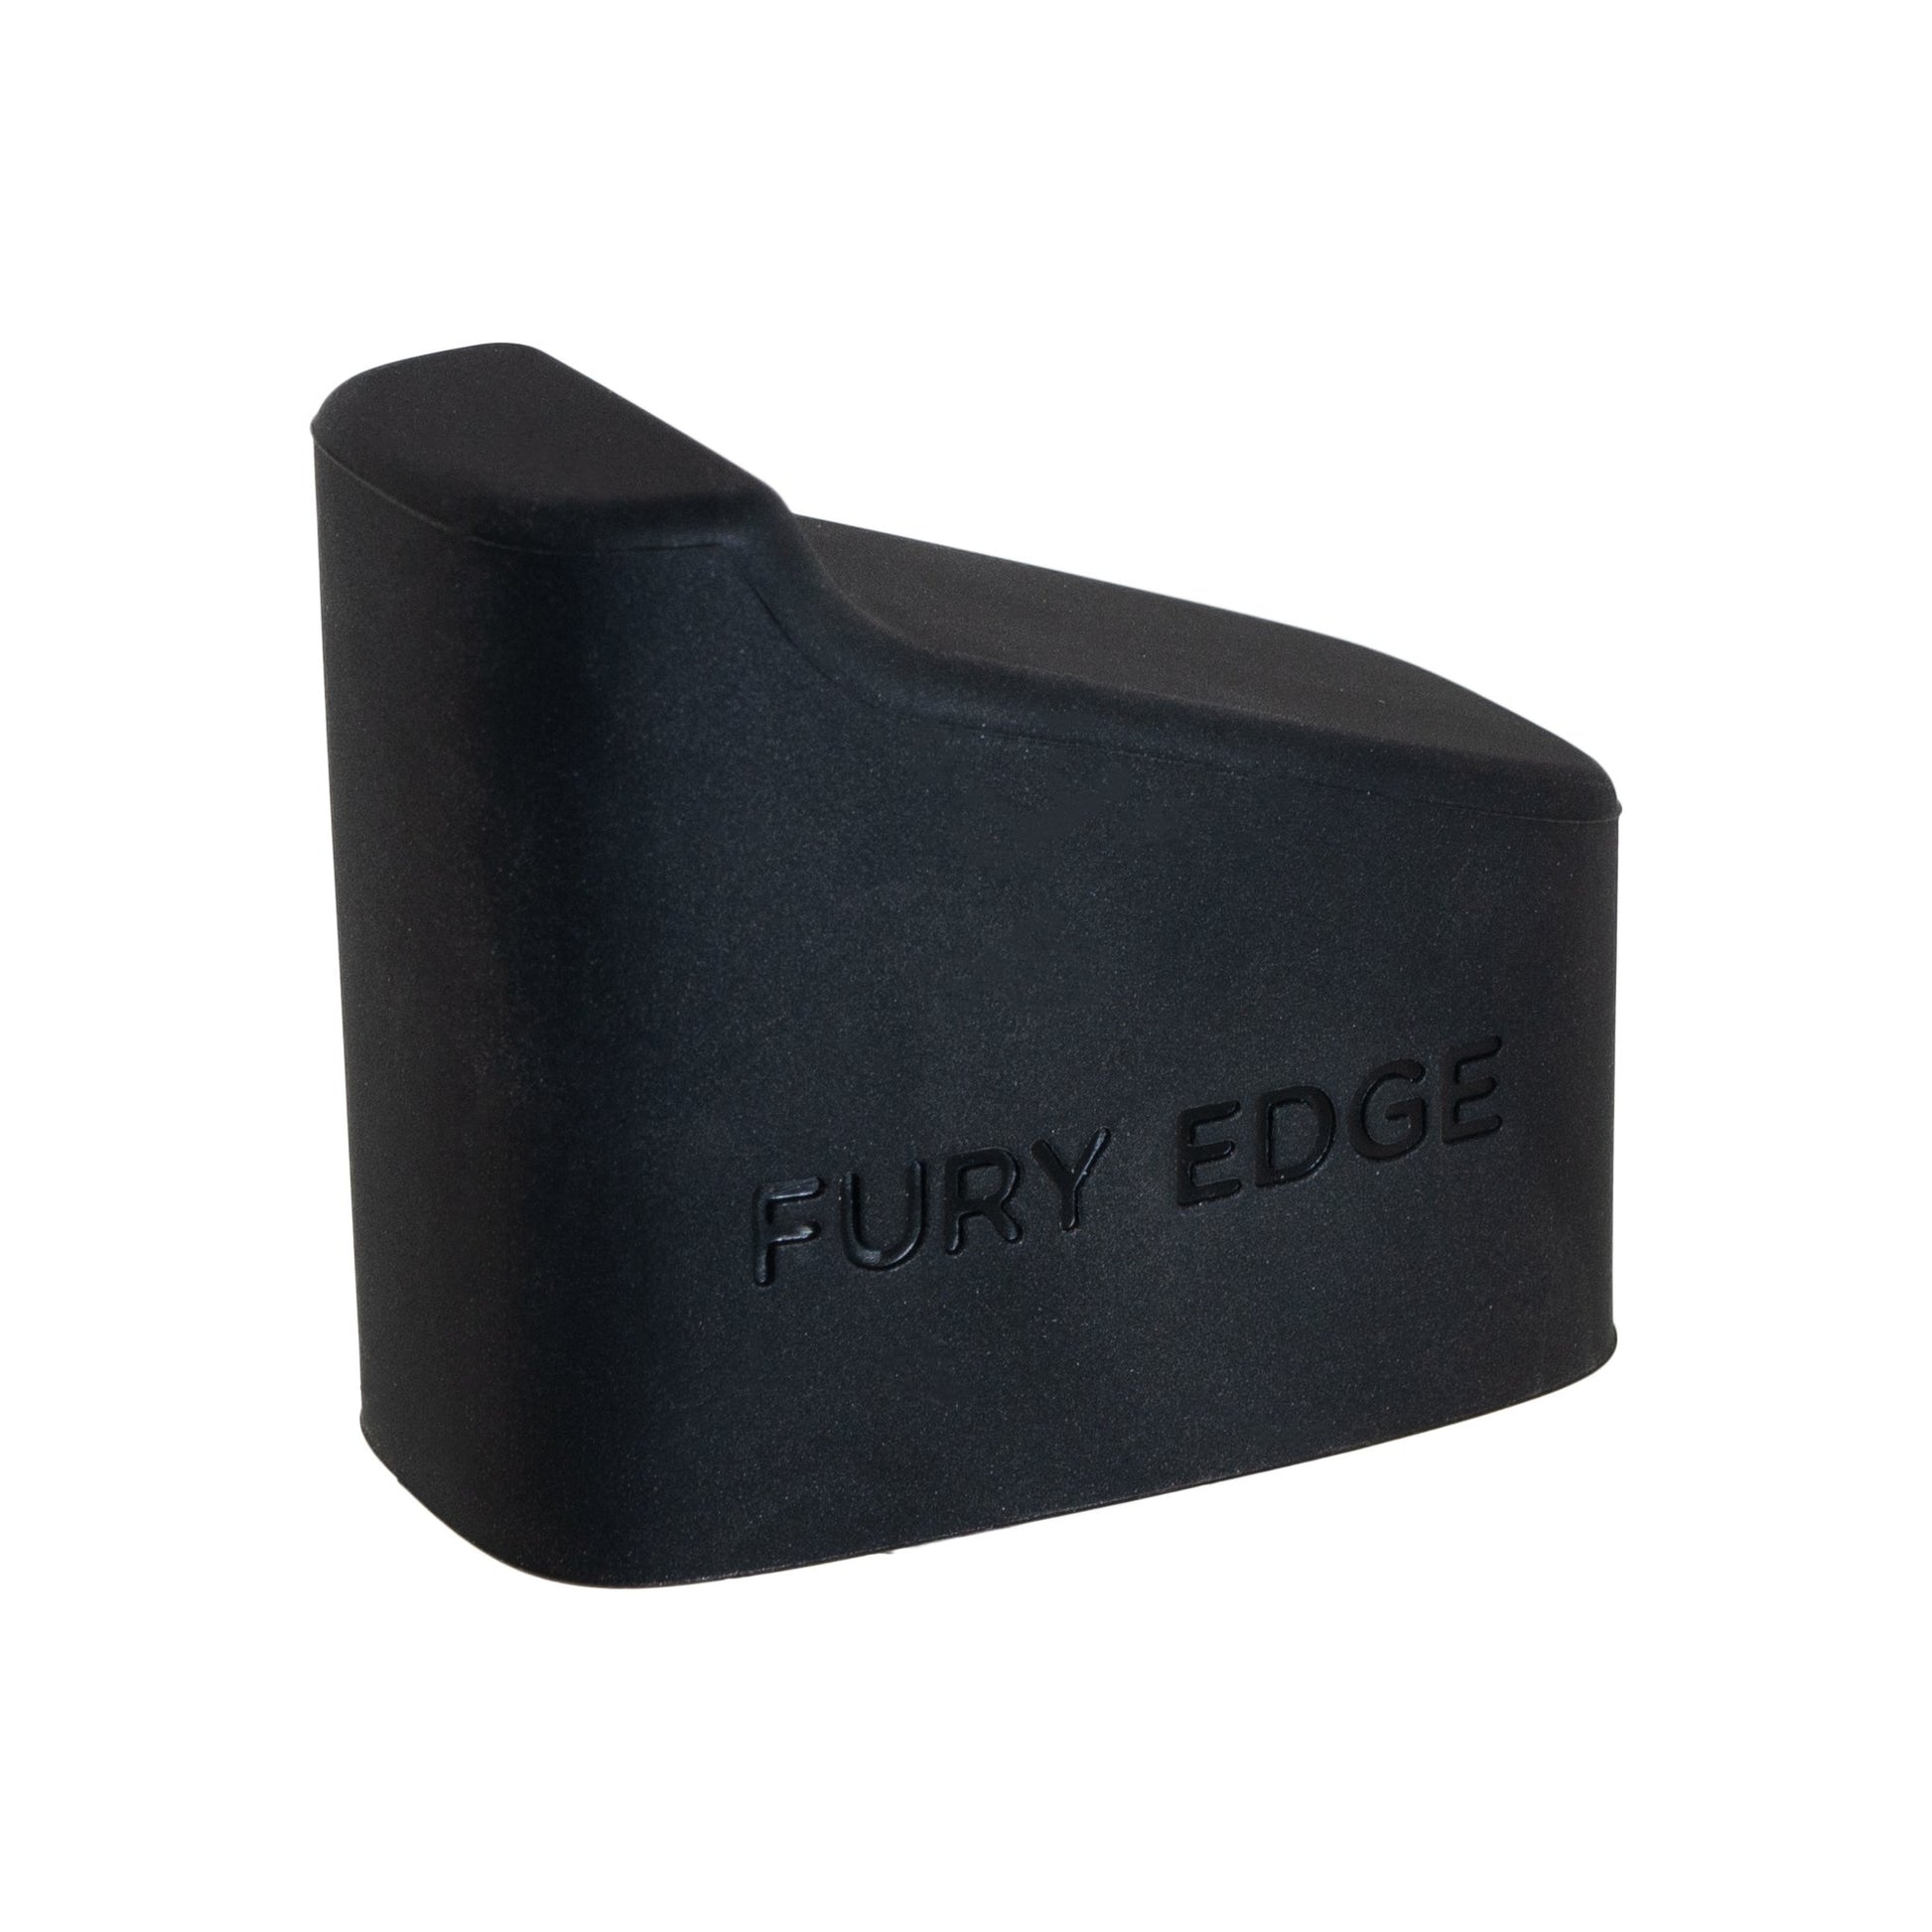 Fury EDGE Mouthpiece Cover Vaporizers Healthy Rips 